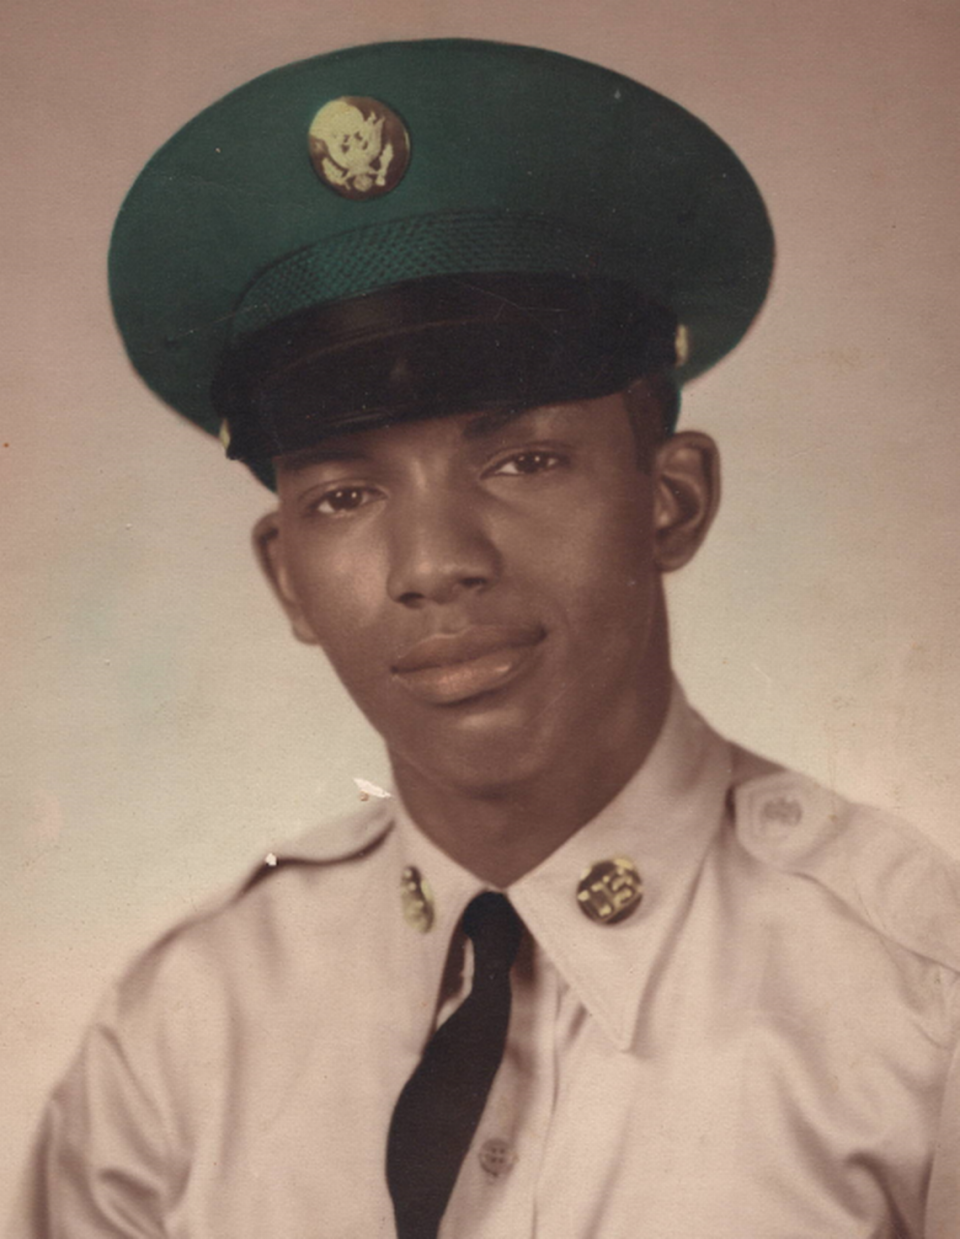 Clarence Robinson, Army veteran and father, died Sept. 9 at age 77.